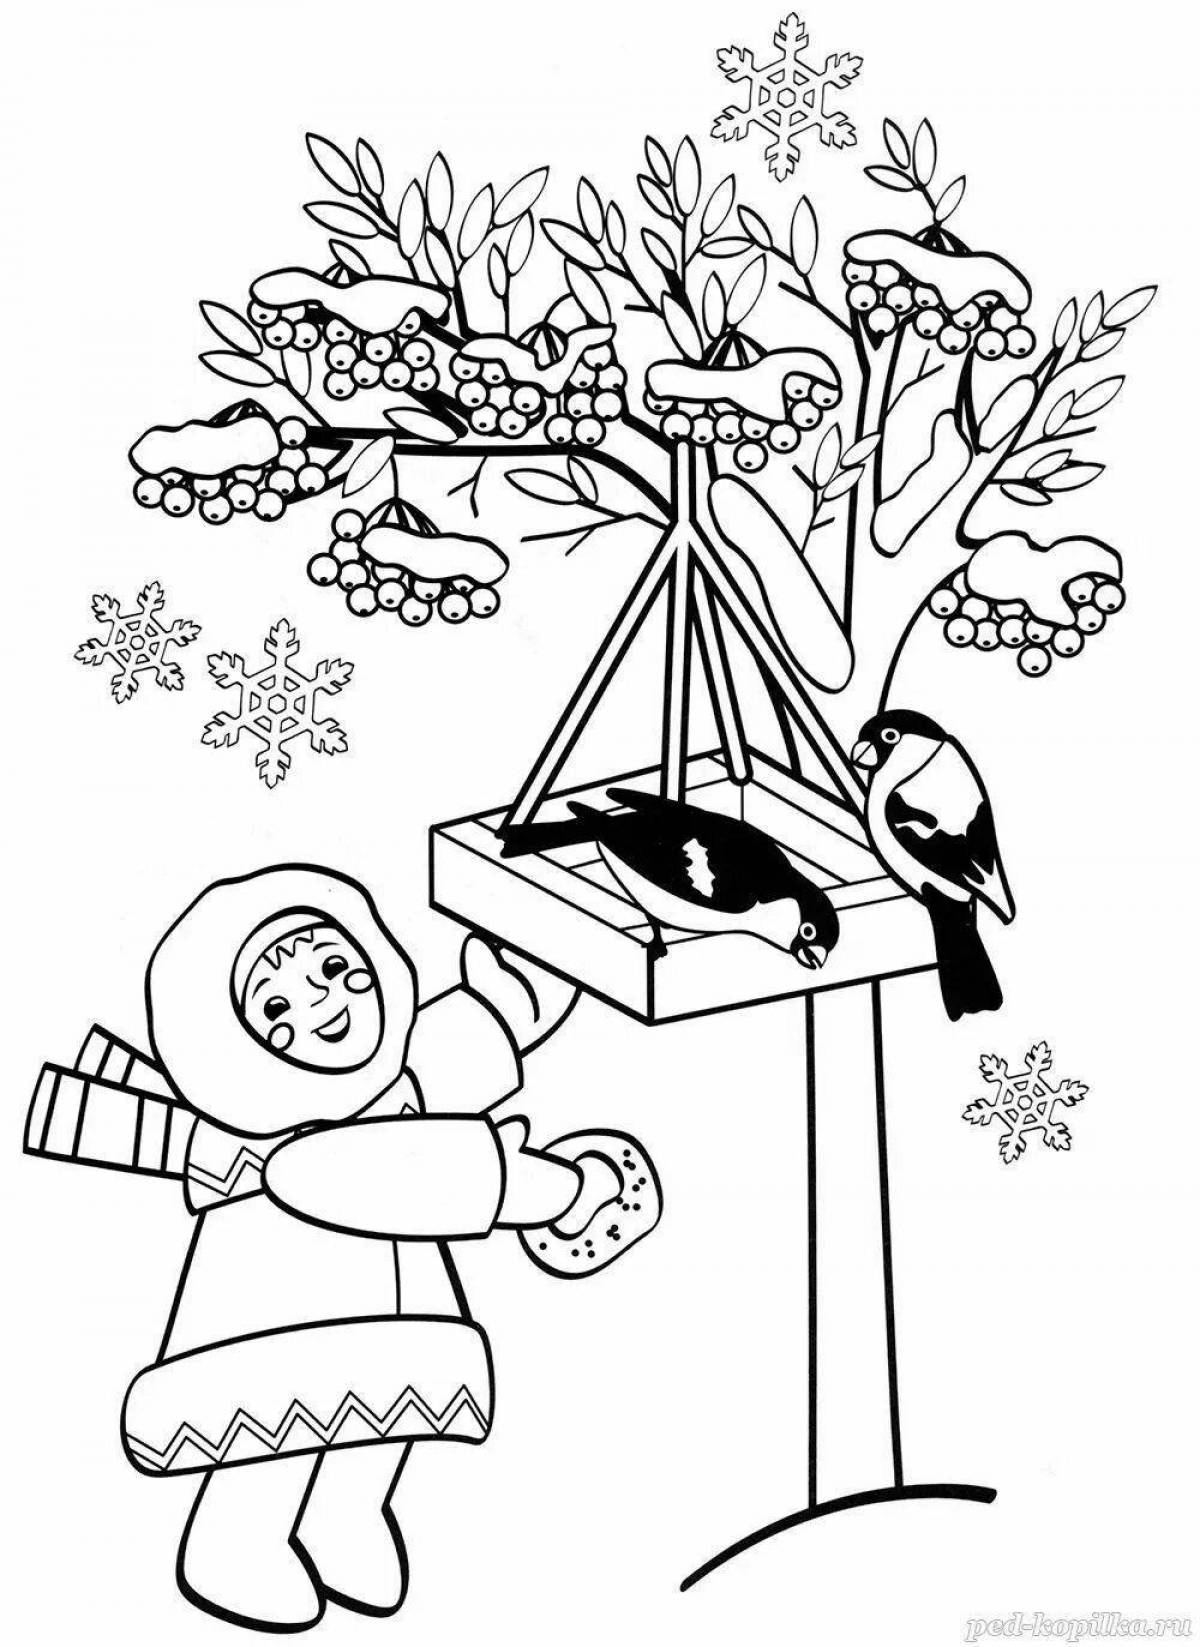 Adorable bird feeder coloring page for toddlers